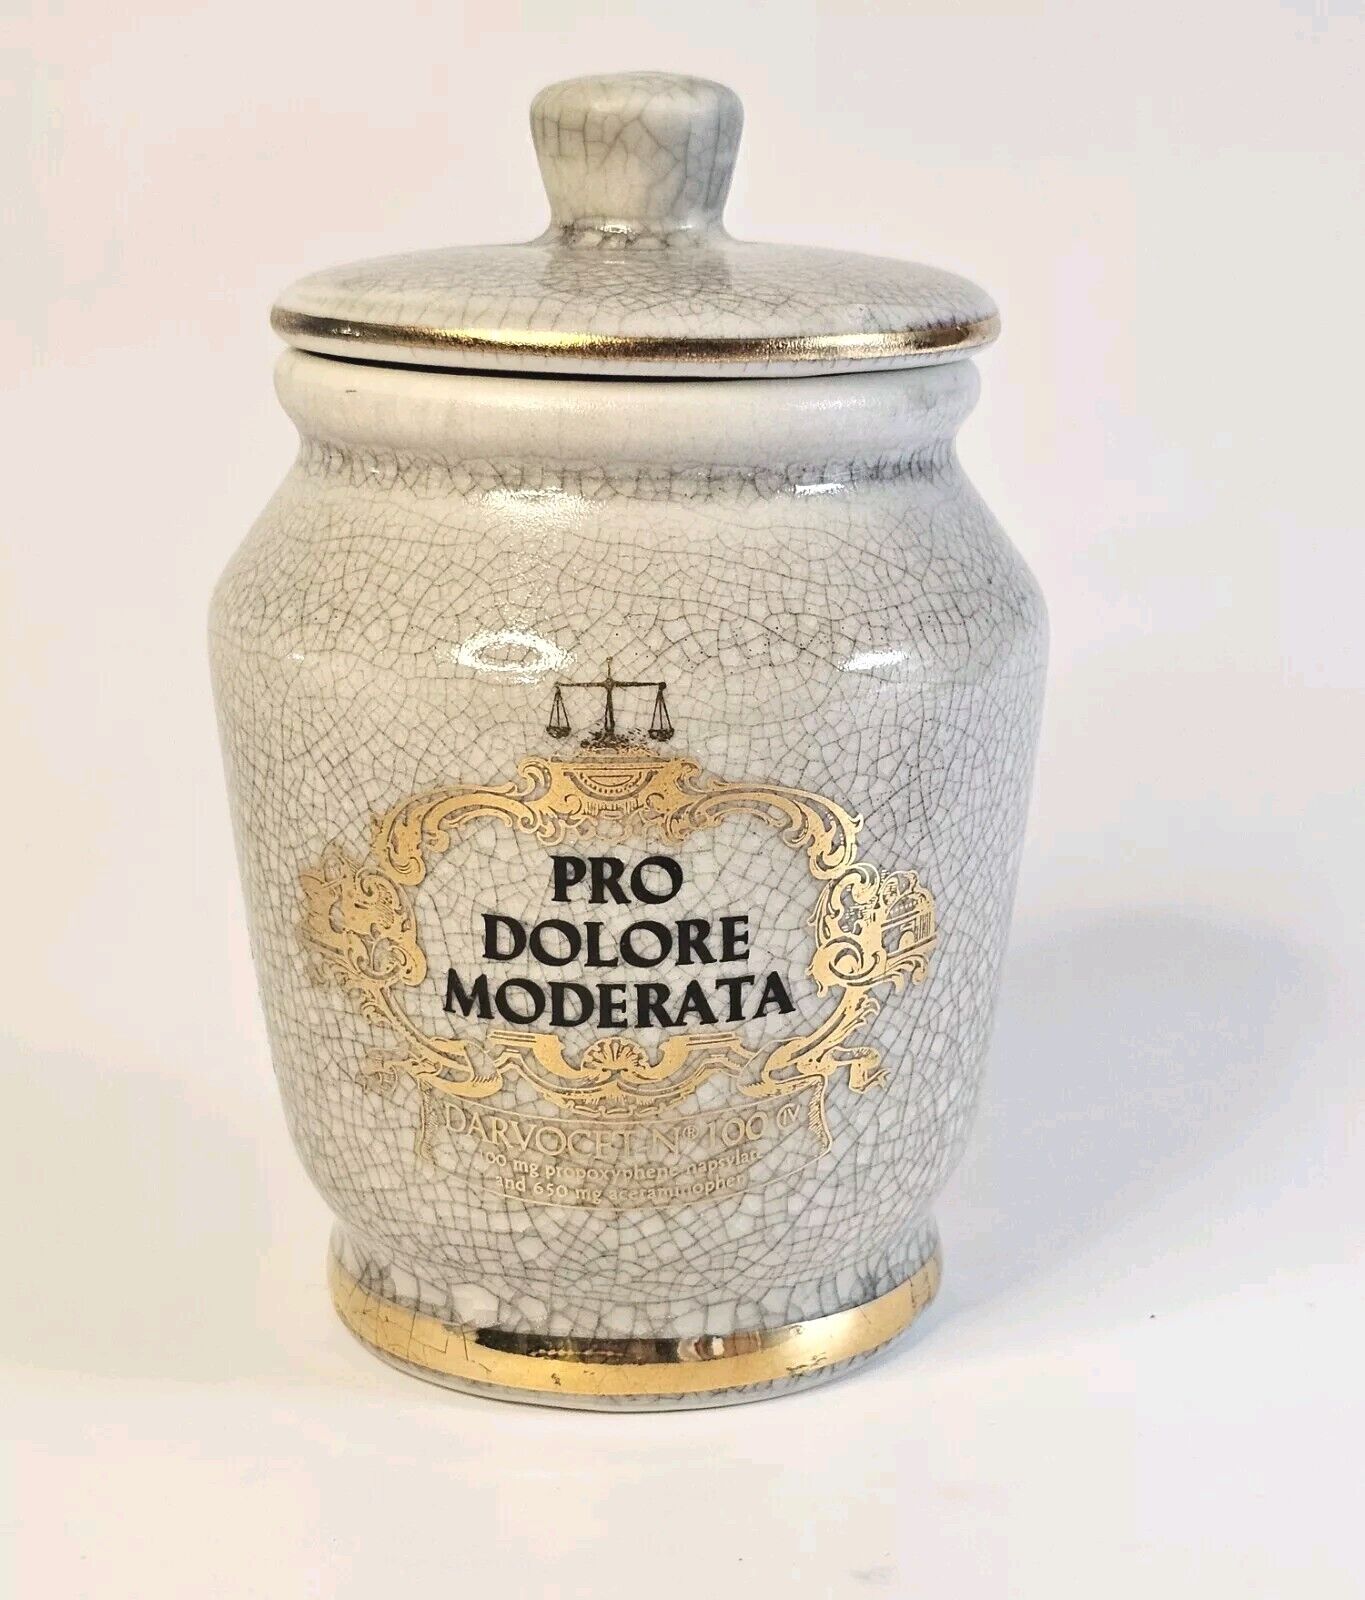 Lilly Apothecary Pro Dolore Moderata Darvocet N 100 Jar